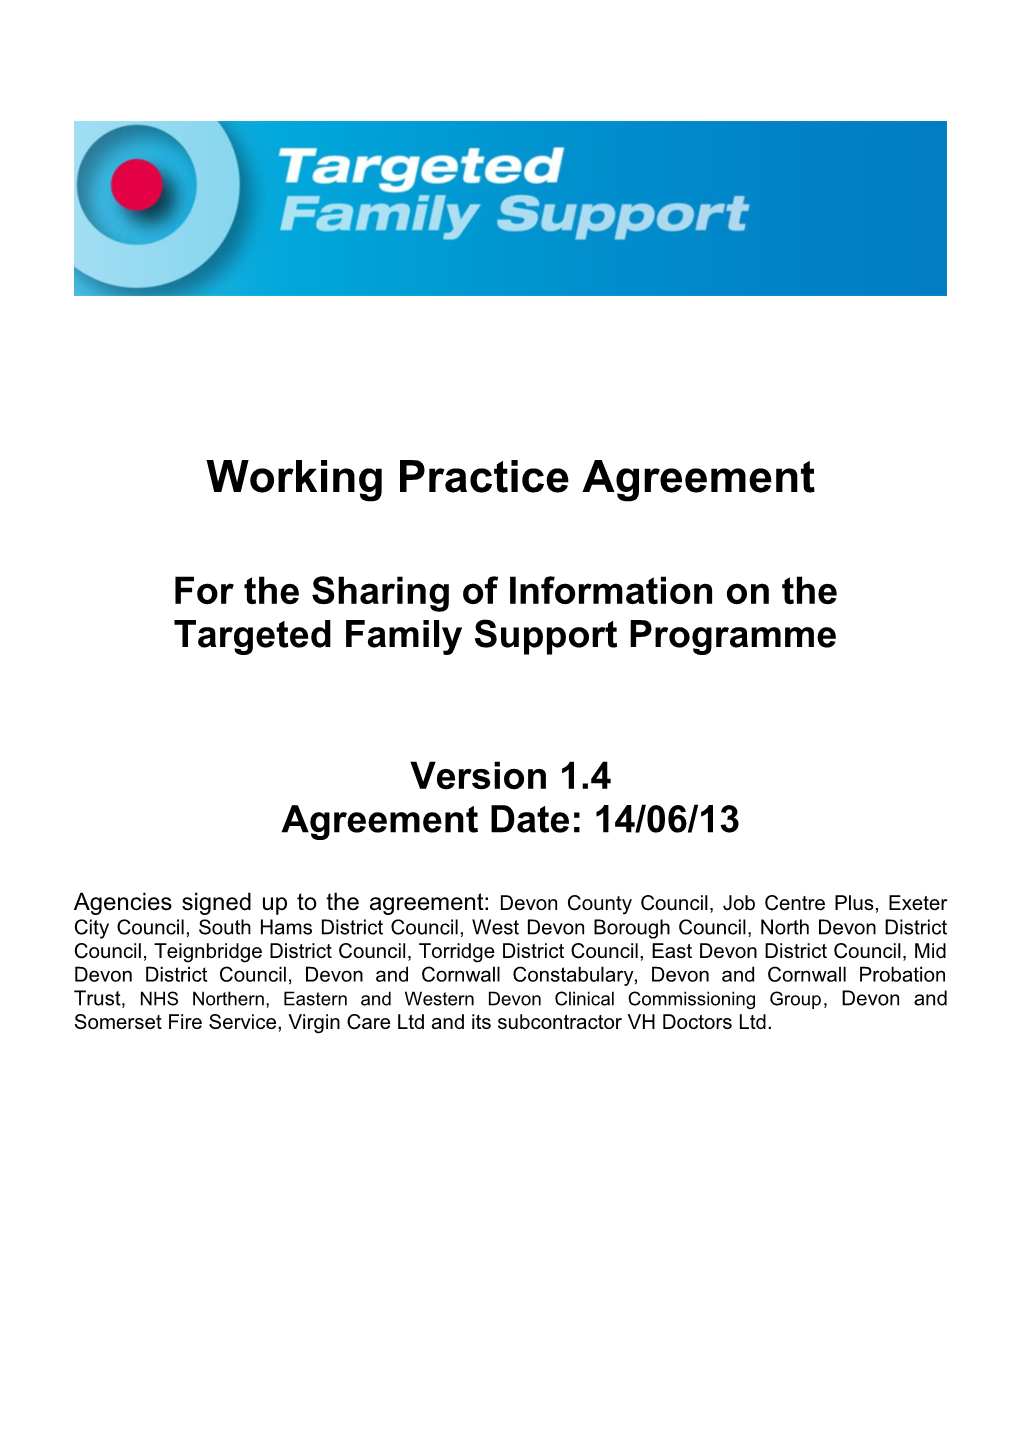 Working Practice Agreement for the Sharing Of: XXXXX